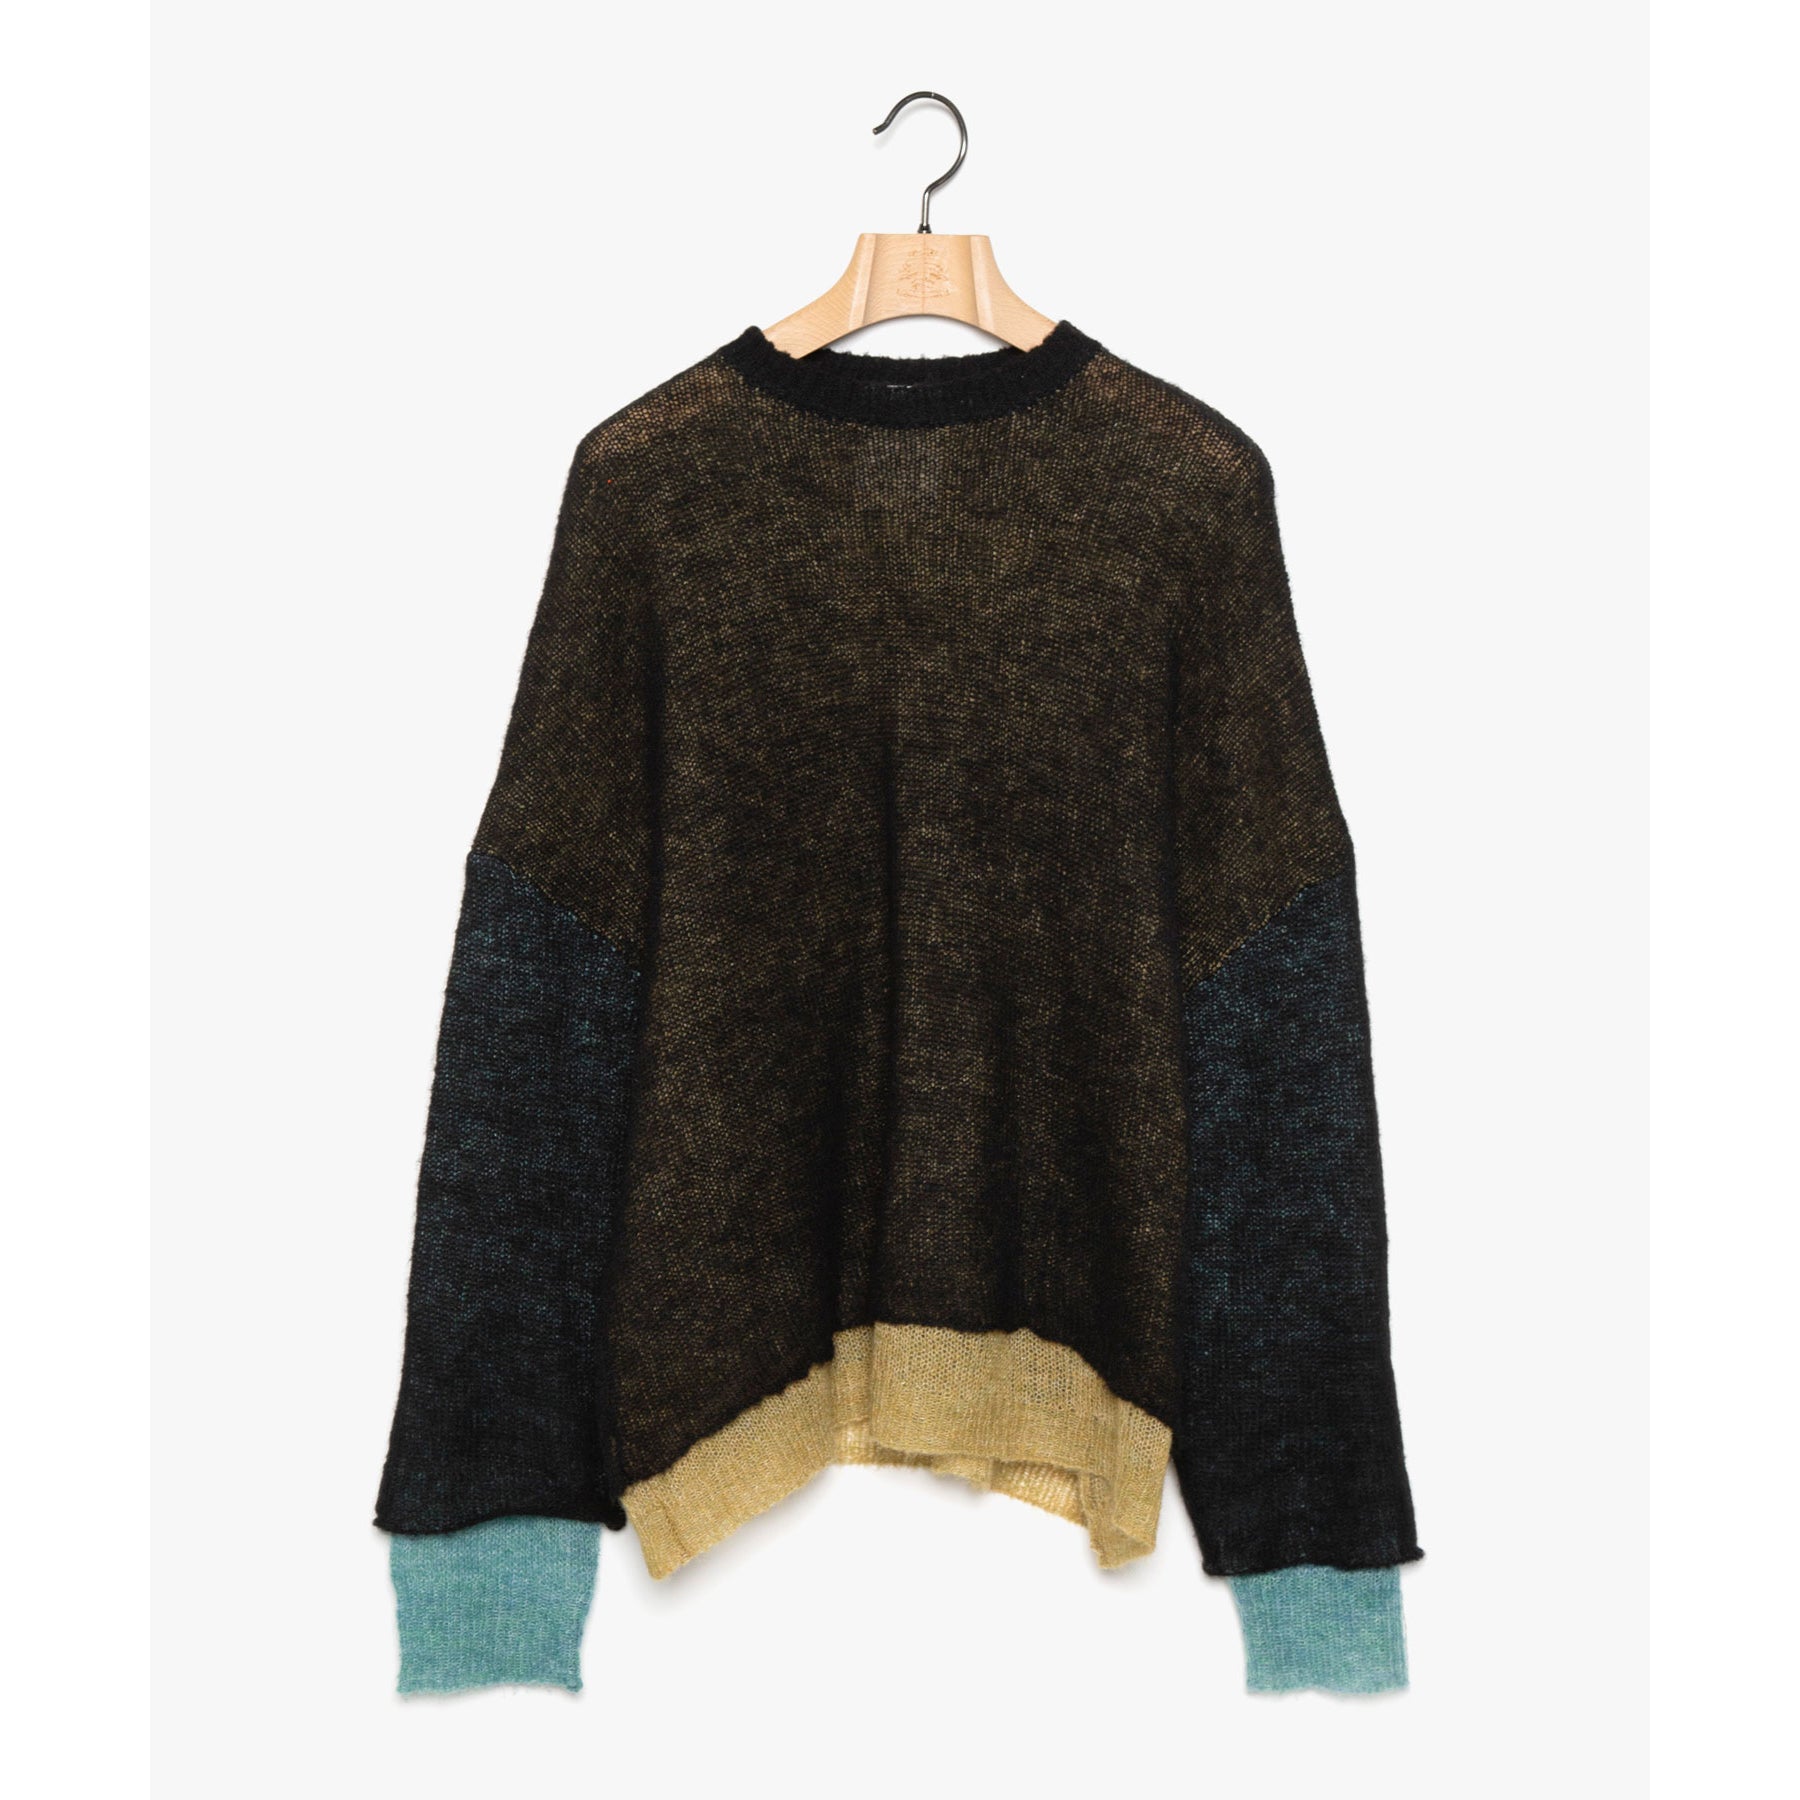 No:SF24AW-11_BLACK | Name:Mohair Color Layer Knit Sweater | Color:Black【STOF_ストフ】【入荷予定アイテム・入荷連絡可能】